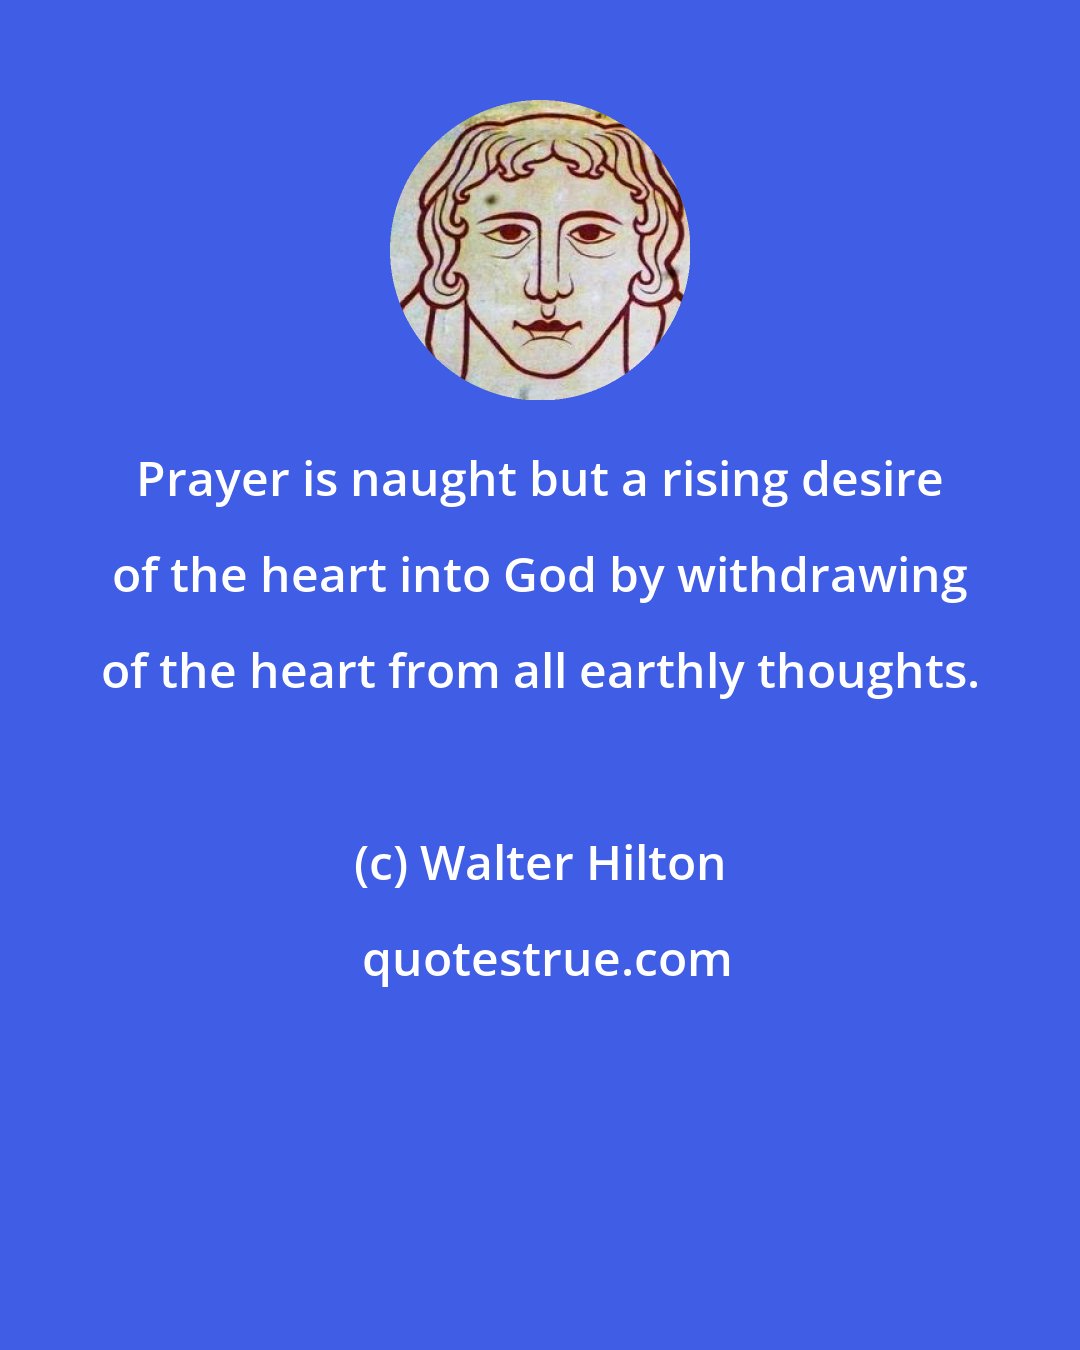 Walter Hilton: Prayer is naught but a rising desire of the heart into God by withdrawing of the heart from all earthly thoughts.